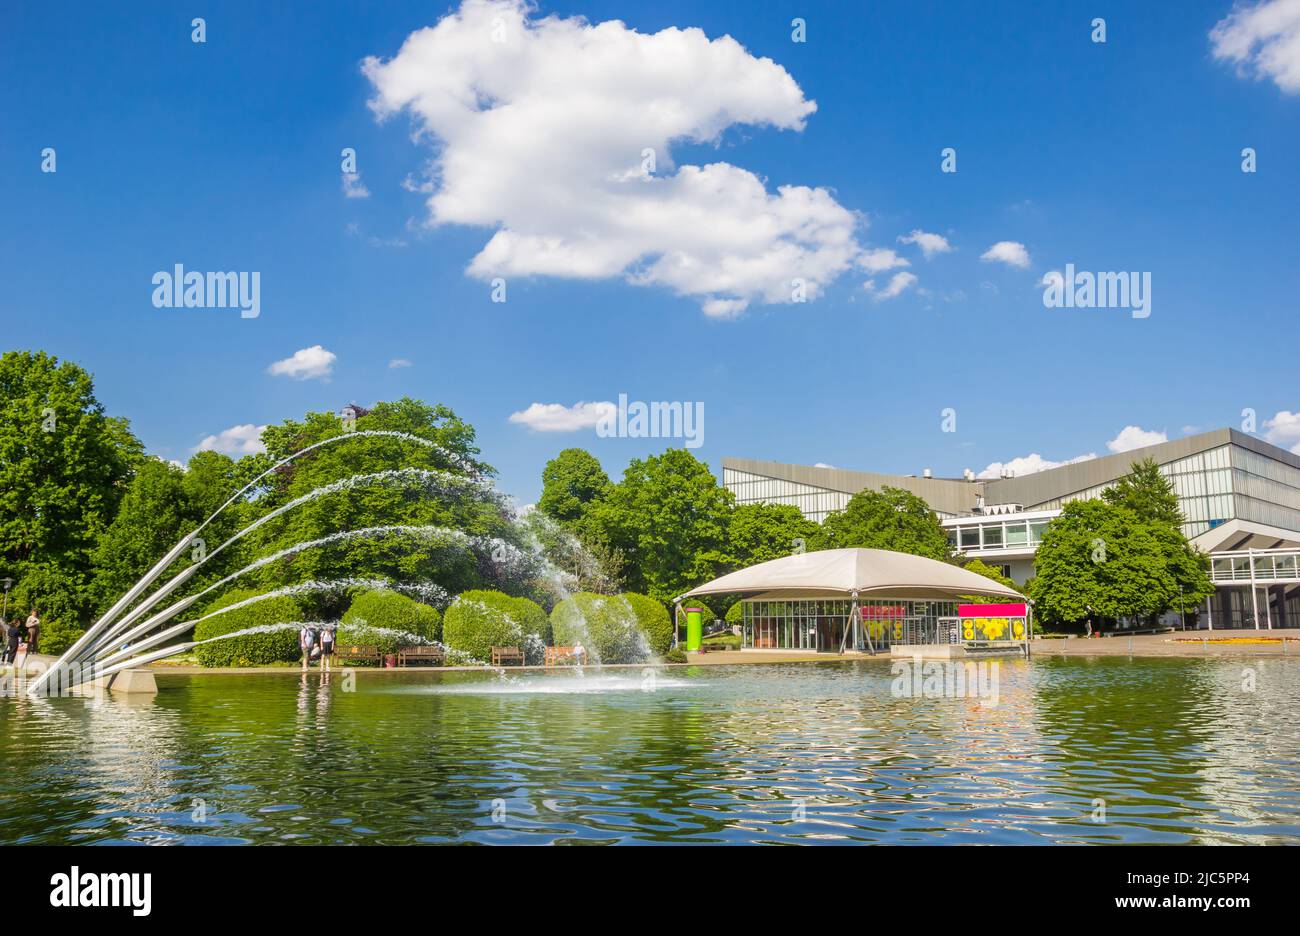 Fountain in the lake of the Gruga park in Essen, Germany Stock Photo